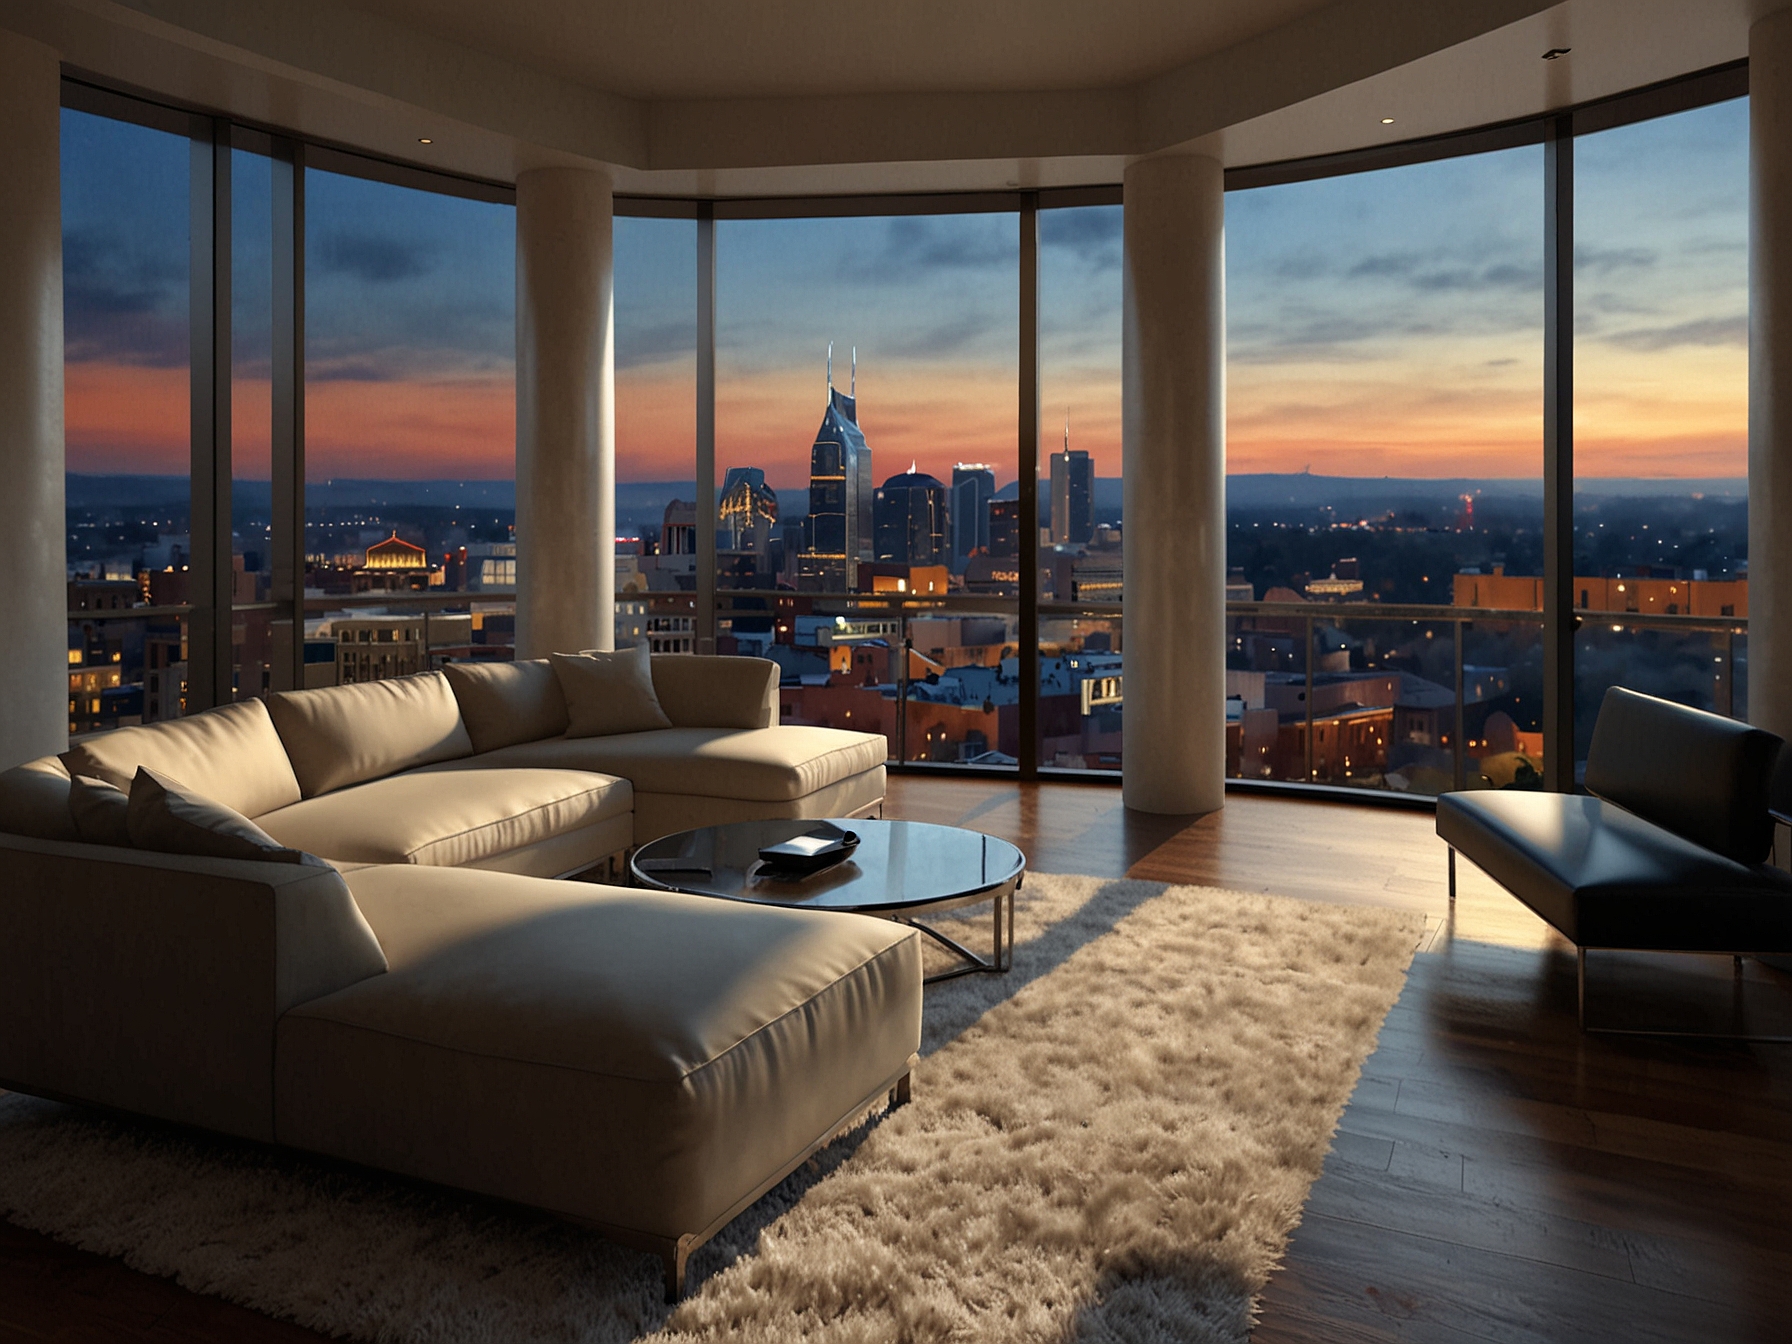 The panoramic view from the $15 million penthouse in Nashville, showcasing its stunning cityscape and modern architectural design.